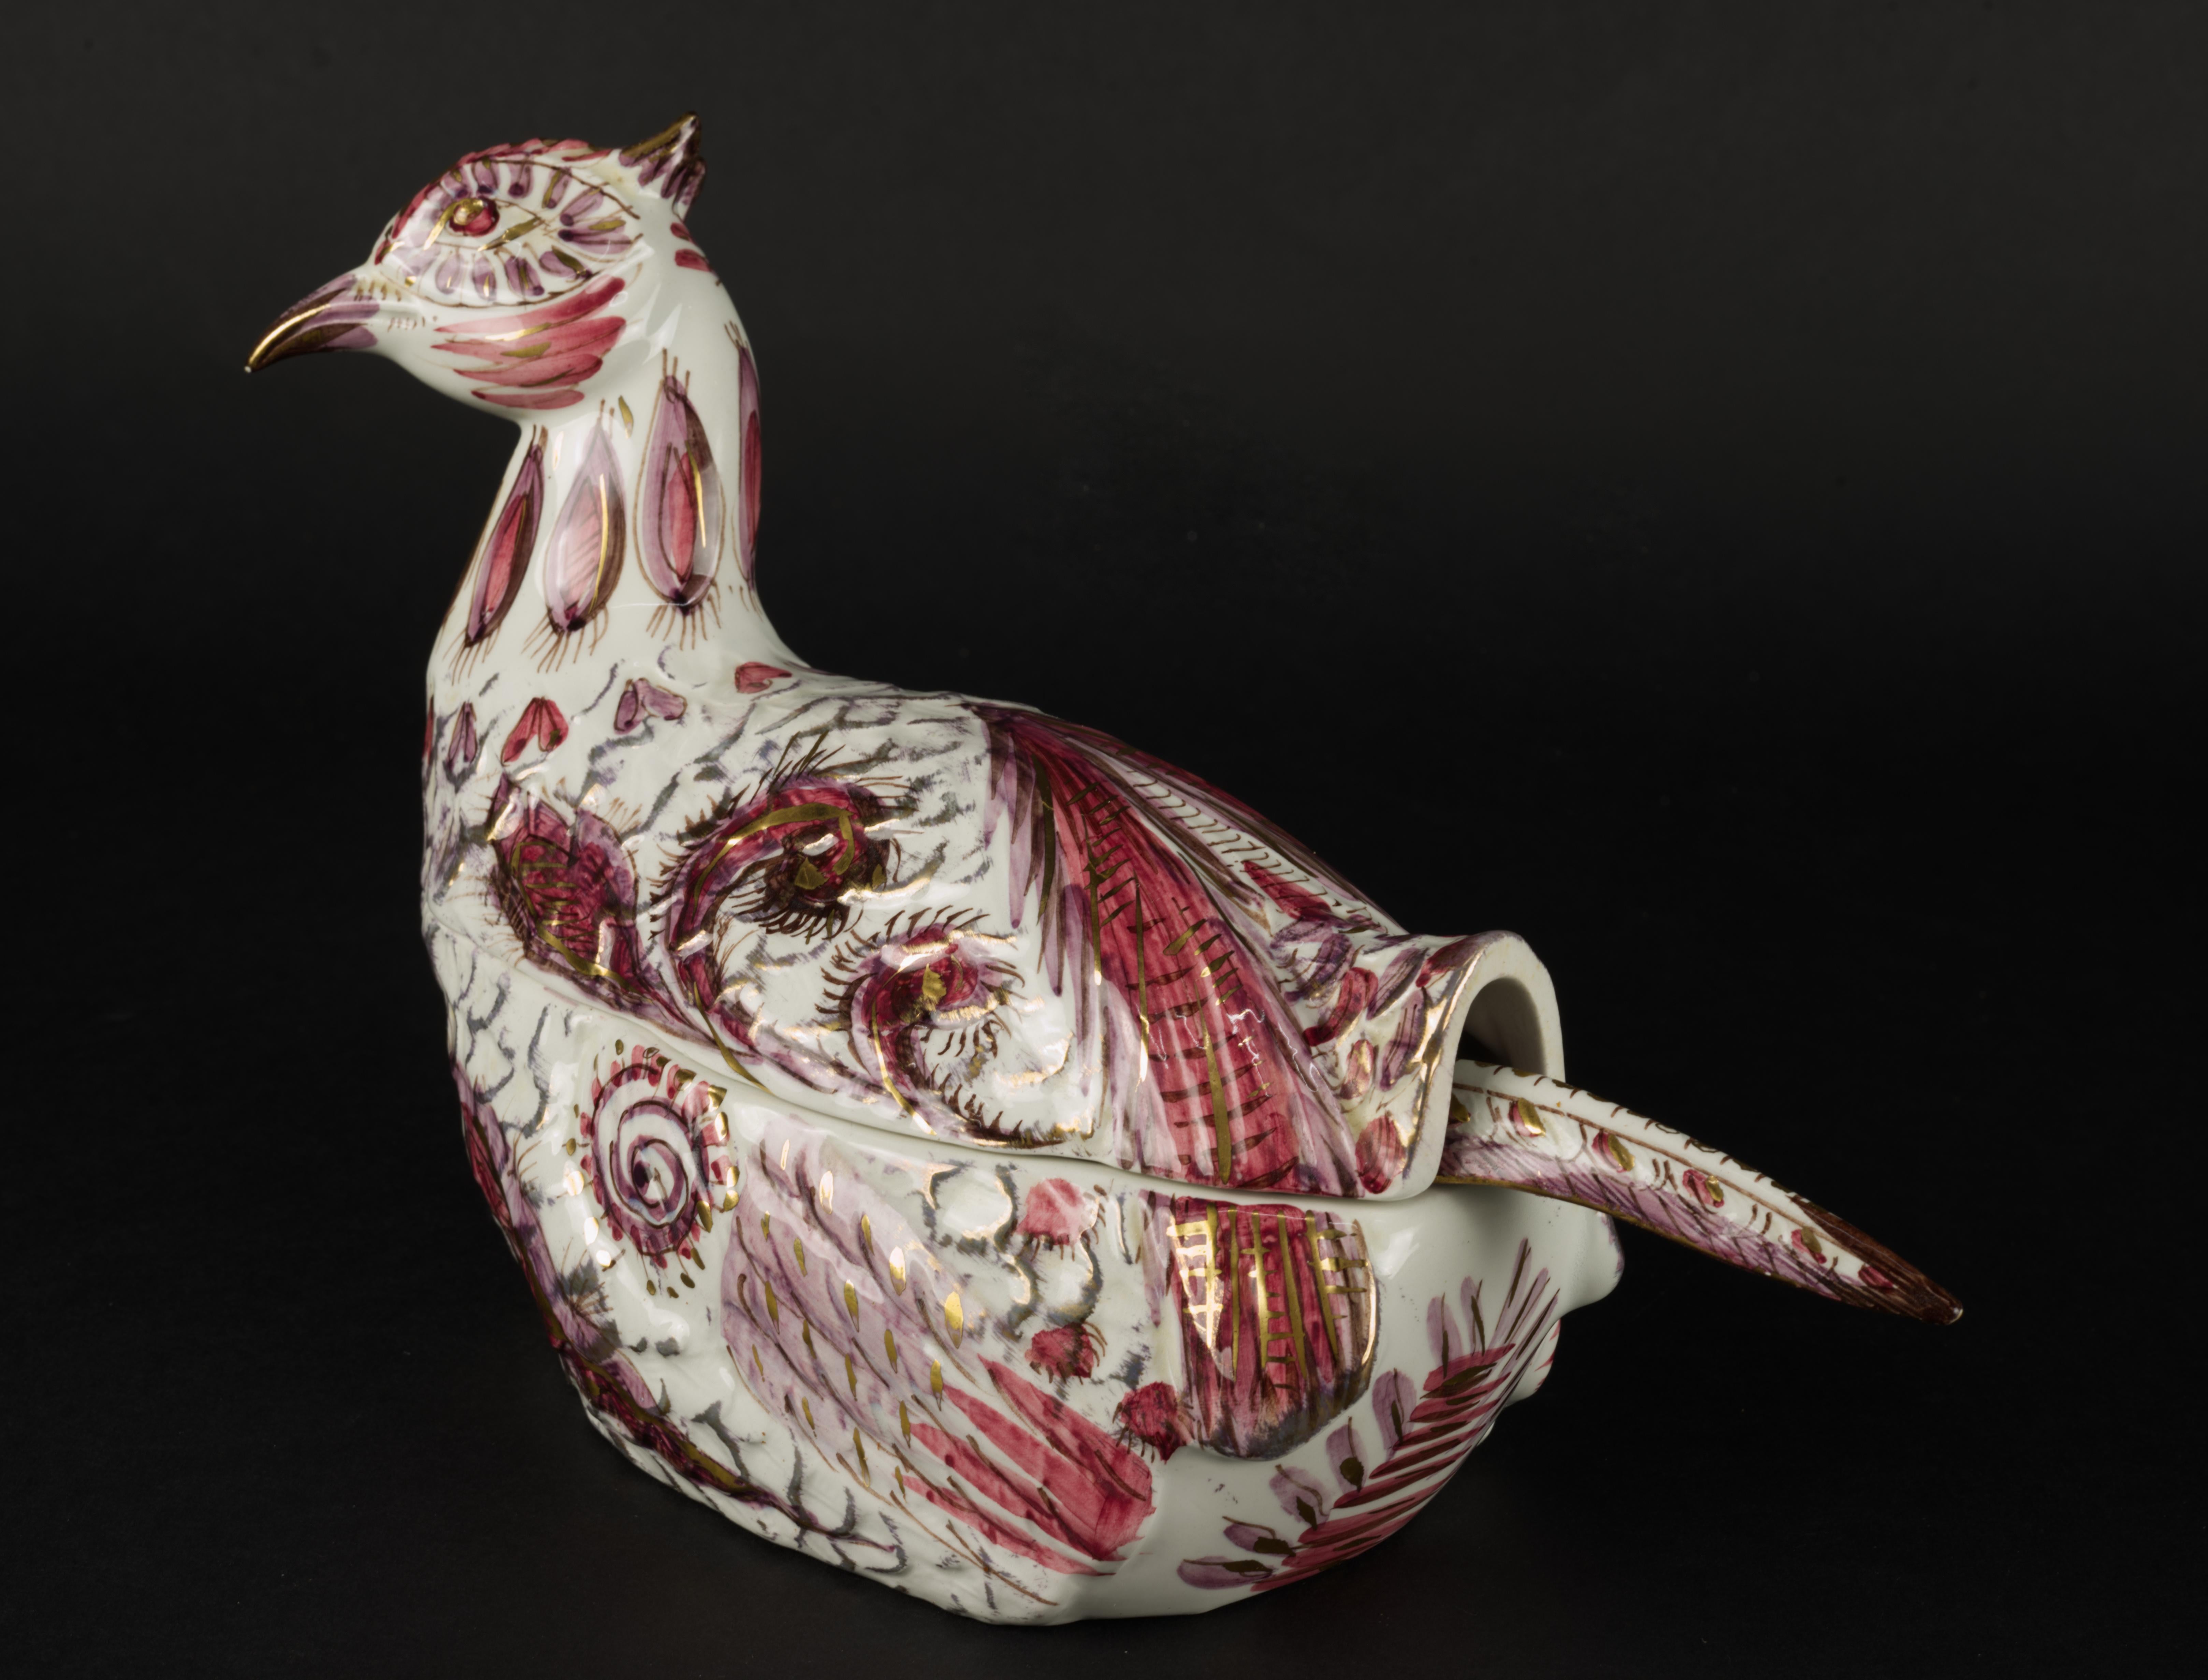 20th Century Mancioli Italy Pheasant lidded Bowl / Tureen With Tail Ladle Vintage 1970s For Sale